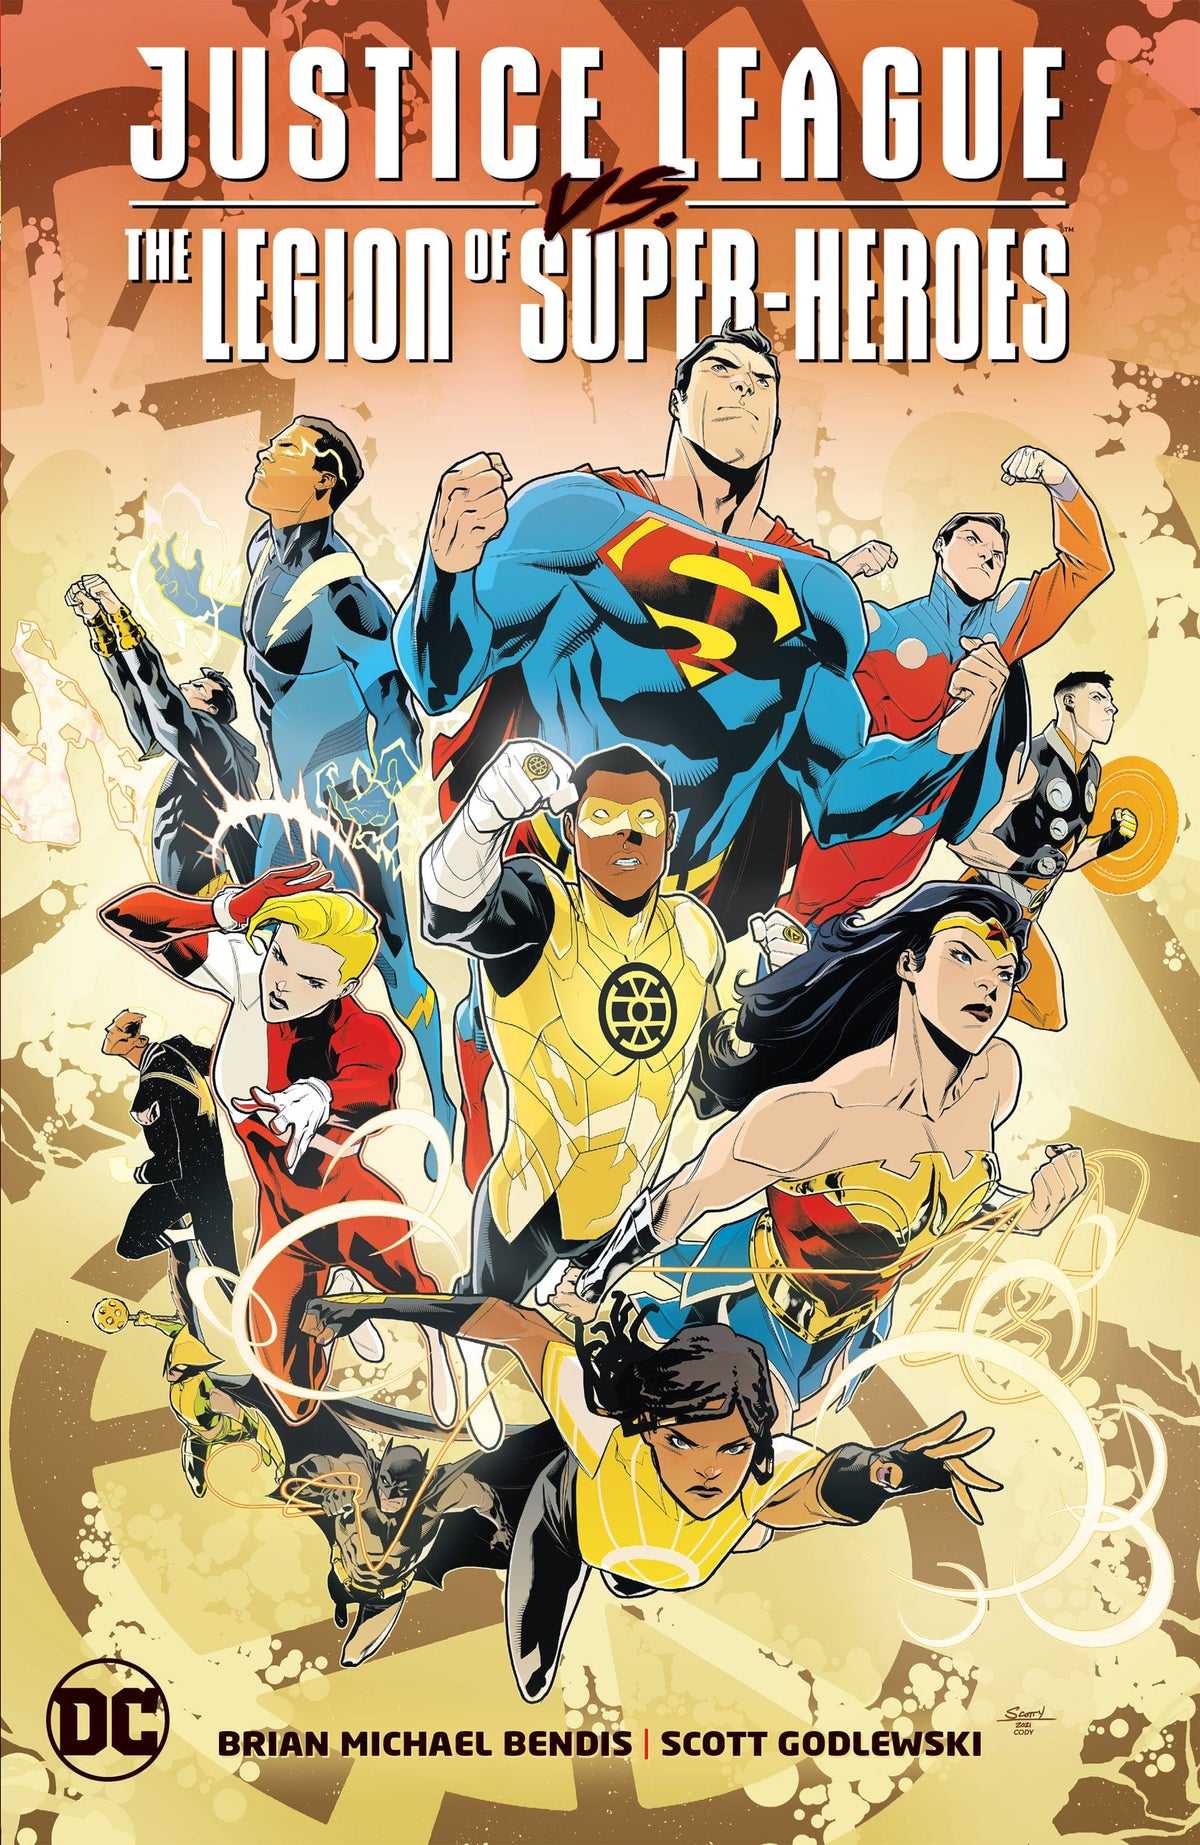 JUSTICE LEAGUE VS THE LEGION OF SUPER-HEROES TP - Third Eye